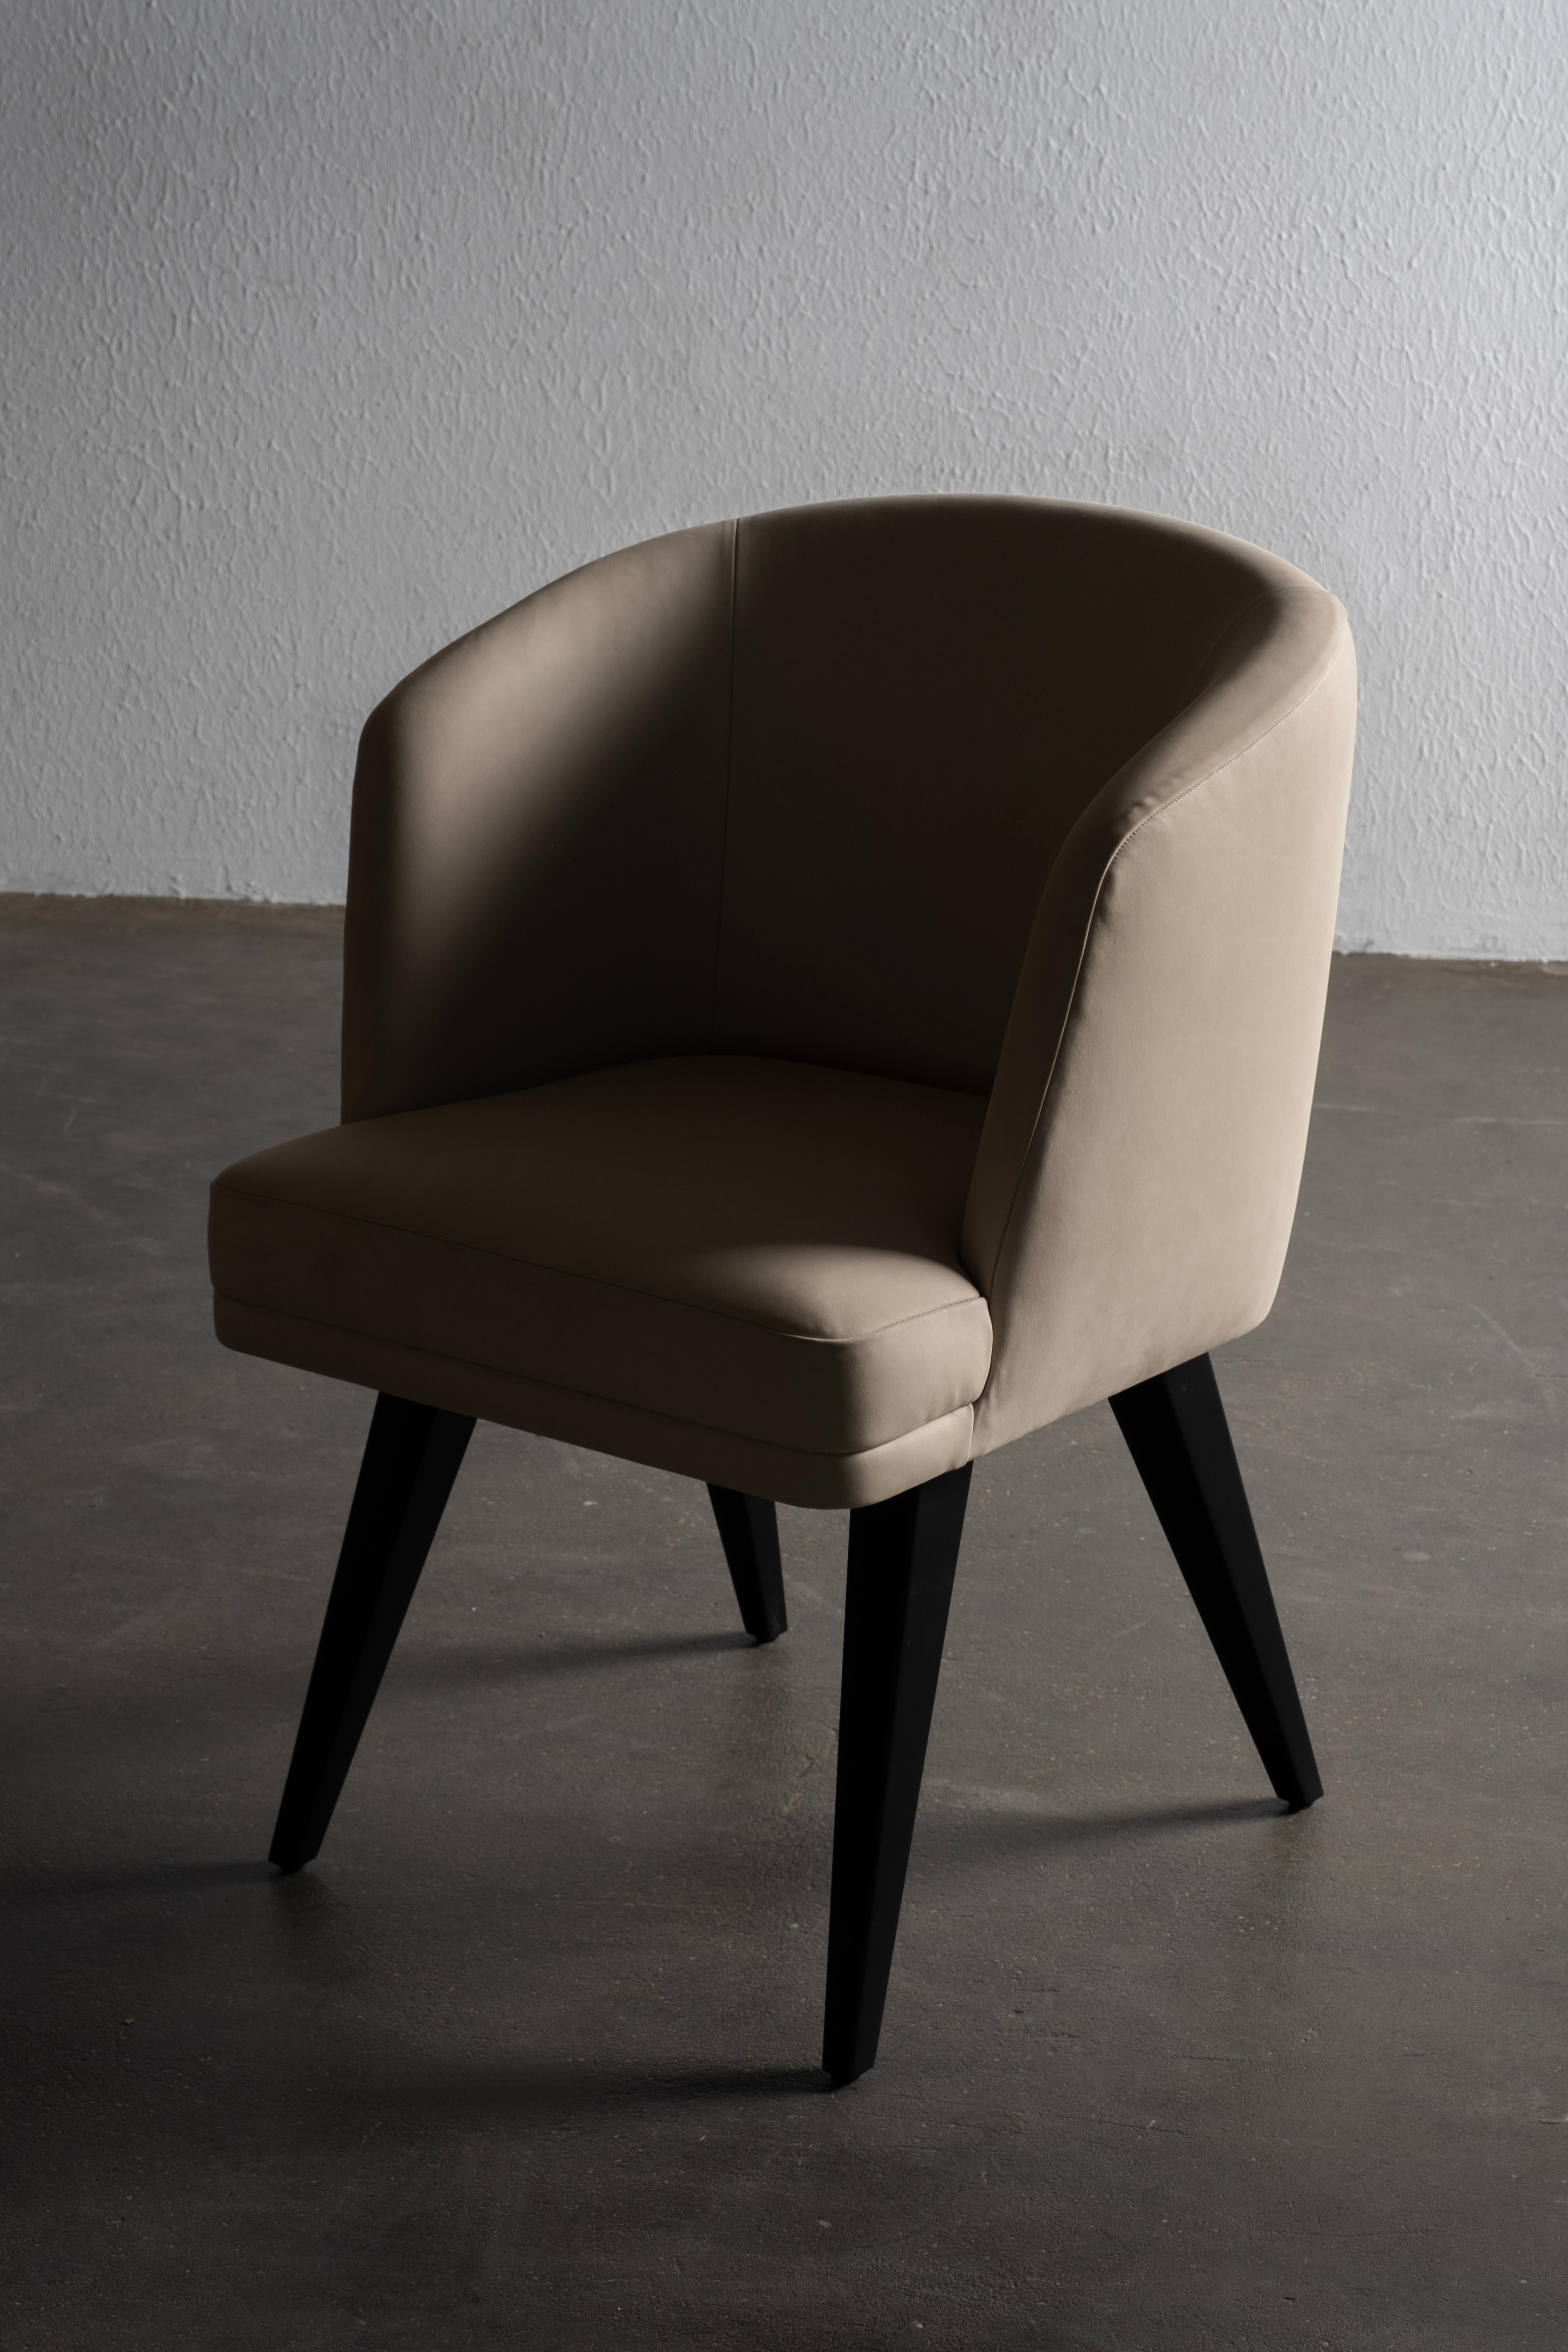 Eleanor Chair, Contemporary Collection, Handcrafted in Portugal - Europe by Greenapple.

The Eleanor leather dining chair, named after Queen Eleanor of Avis, embodies all the virtues of its inspiration. Upholstered in sumptuous fabrics, this dining